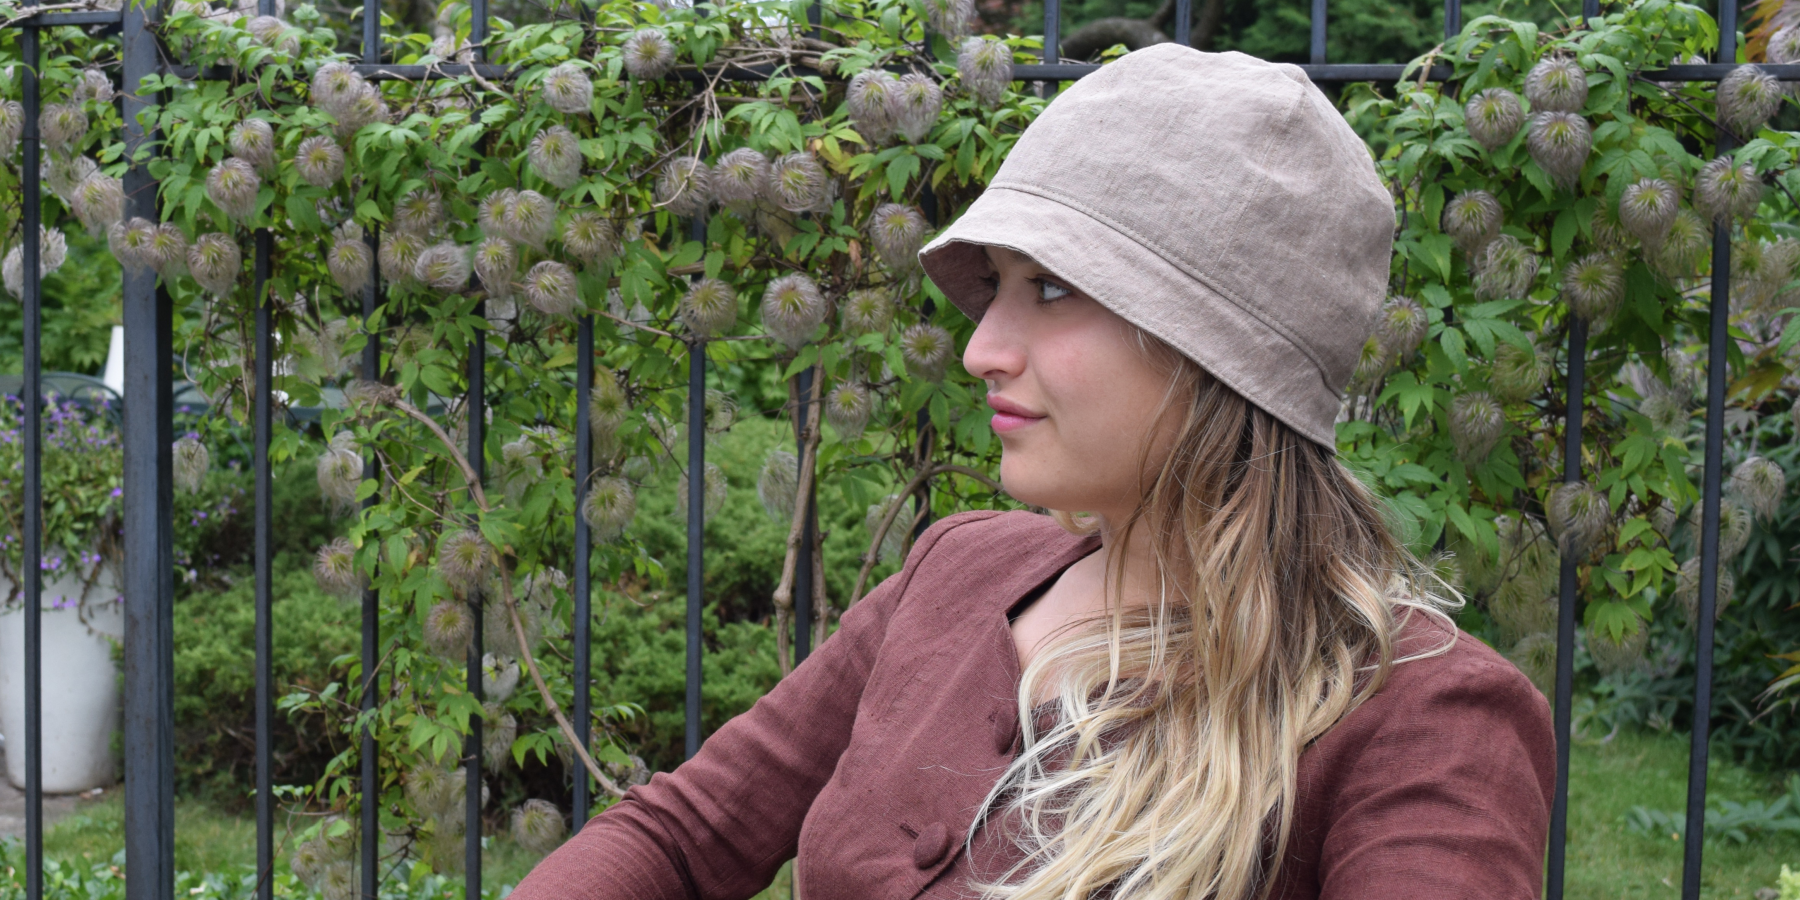 Hemp Cloche Sun Hat-Pretty face framing hat works well for hair loss or chemotherapy.  Hat provides full coverage of head and ears and is rated  UPF50+ excellent sun protection. It blocks 98% full spectrum UVA and UVB harmful radiation. Made in Canada by Puffin Gear